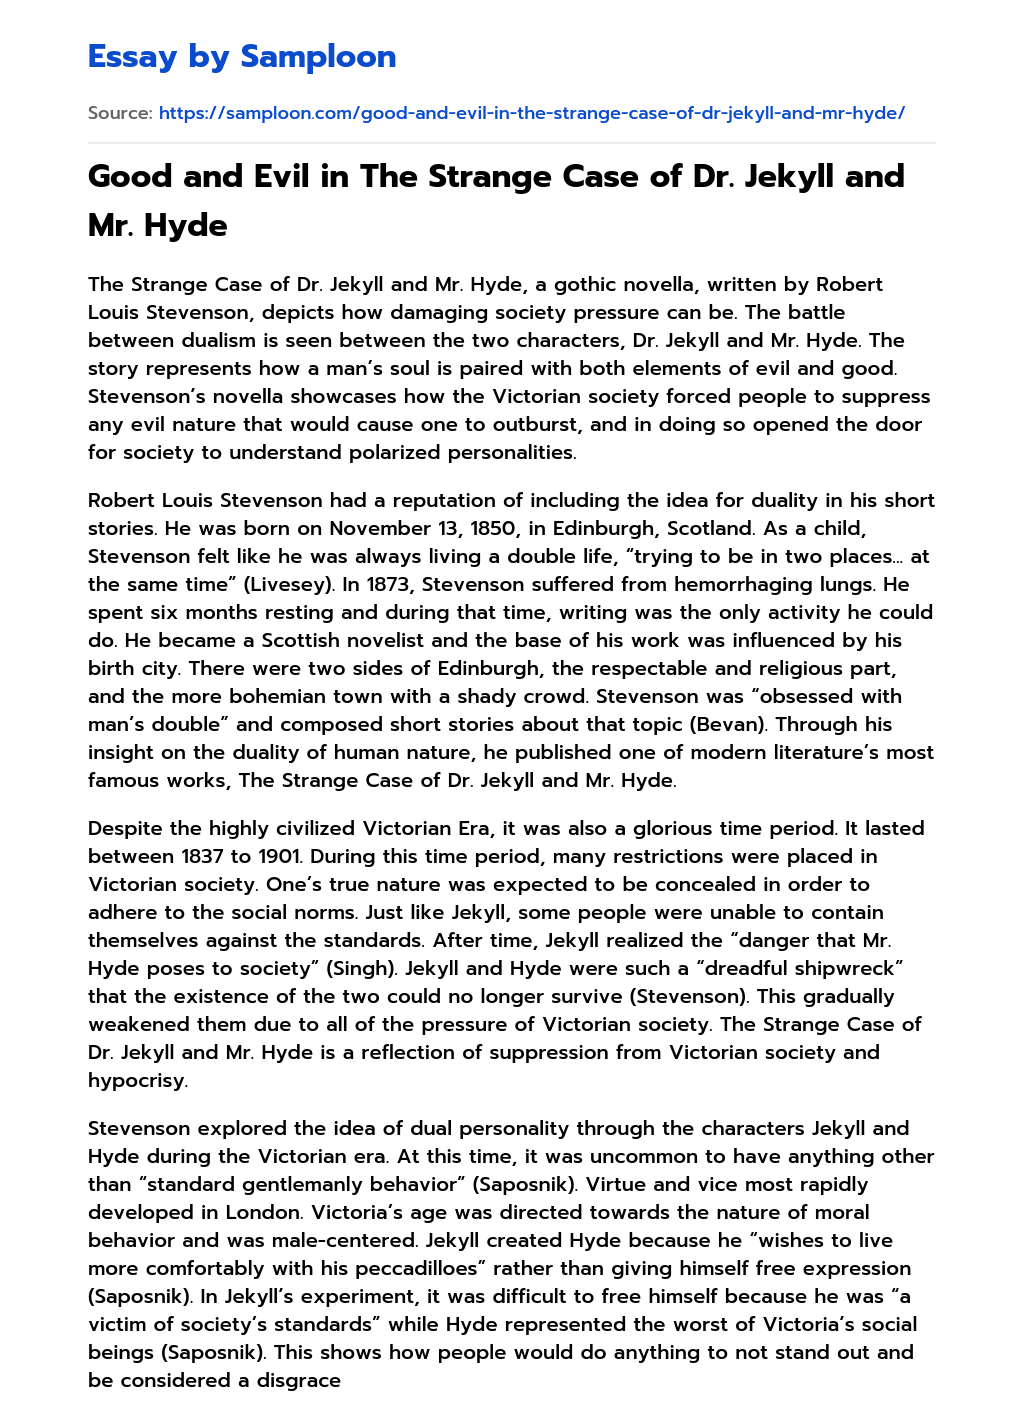 good and evil in jekyll and hyde essay